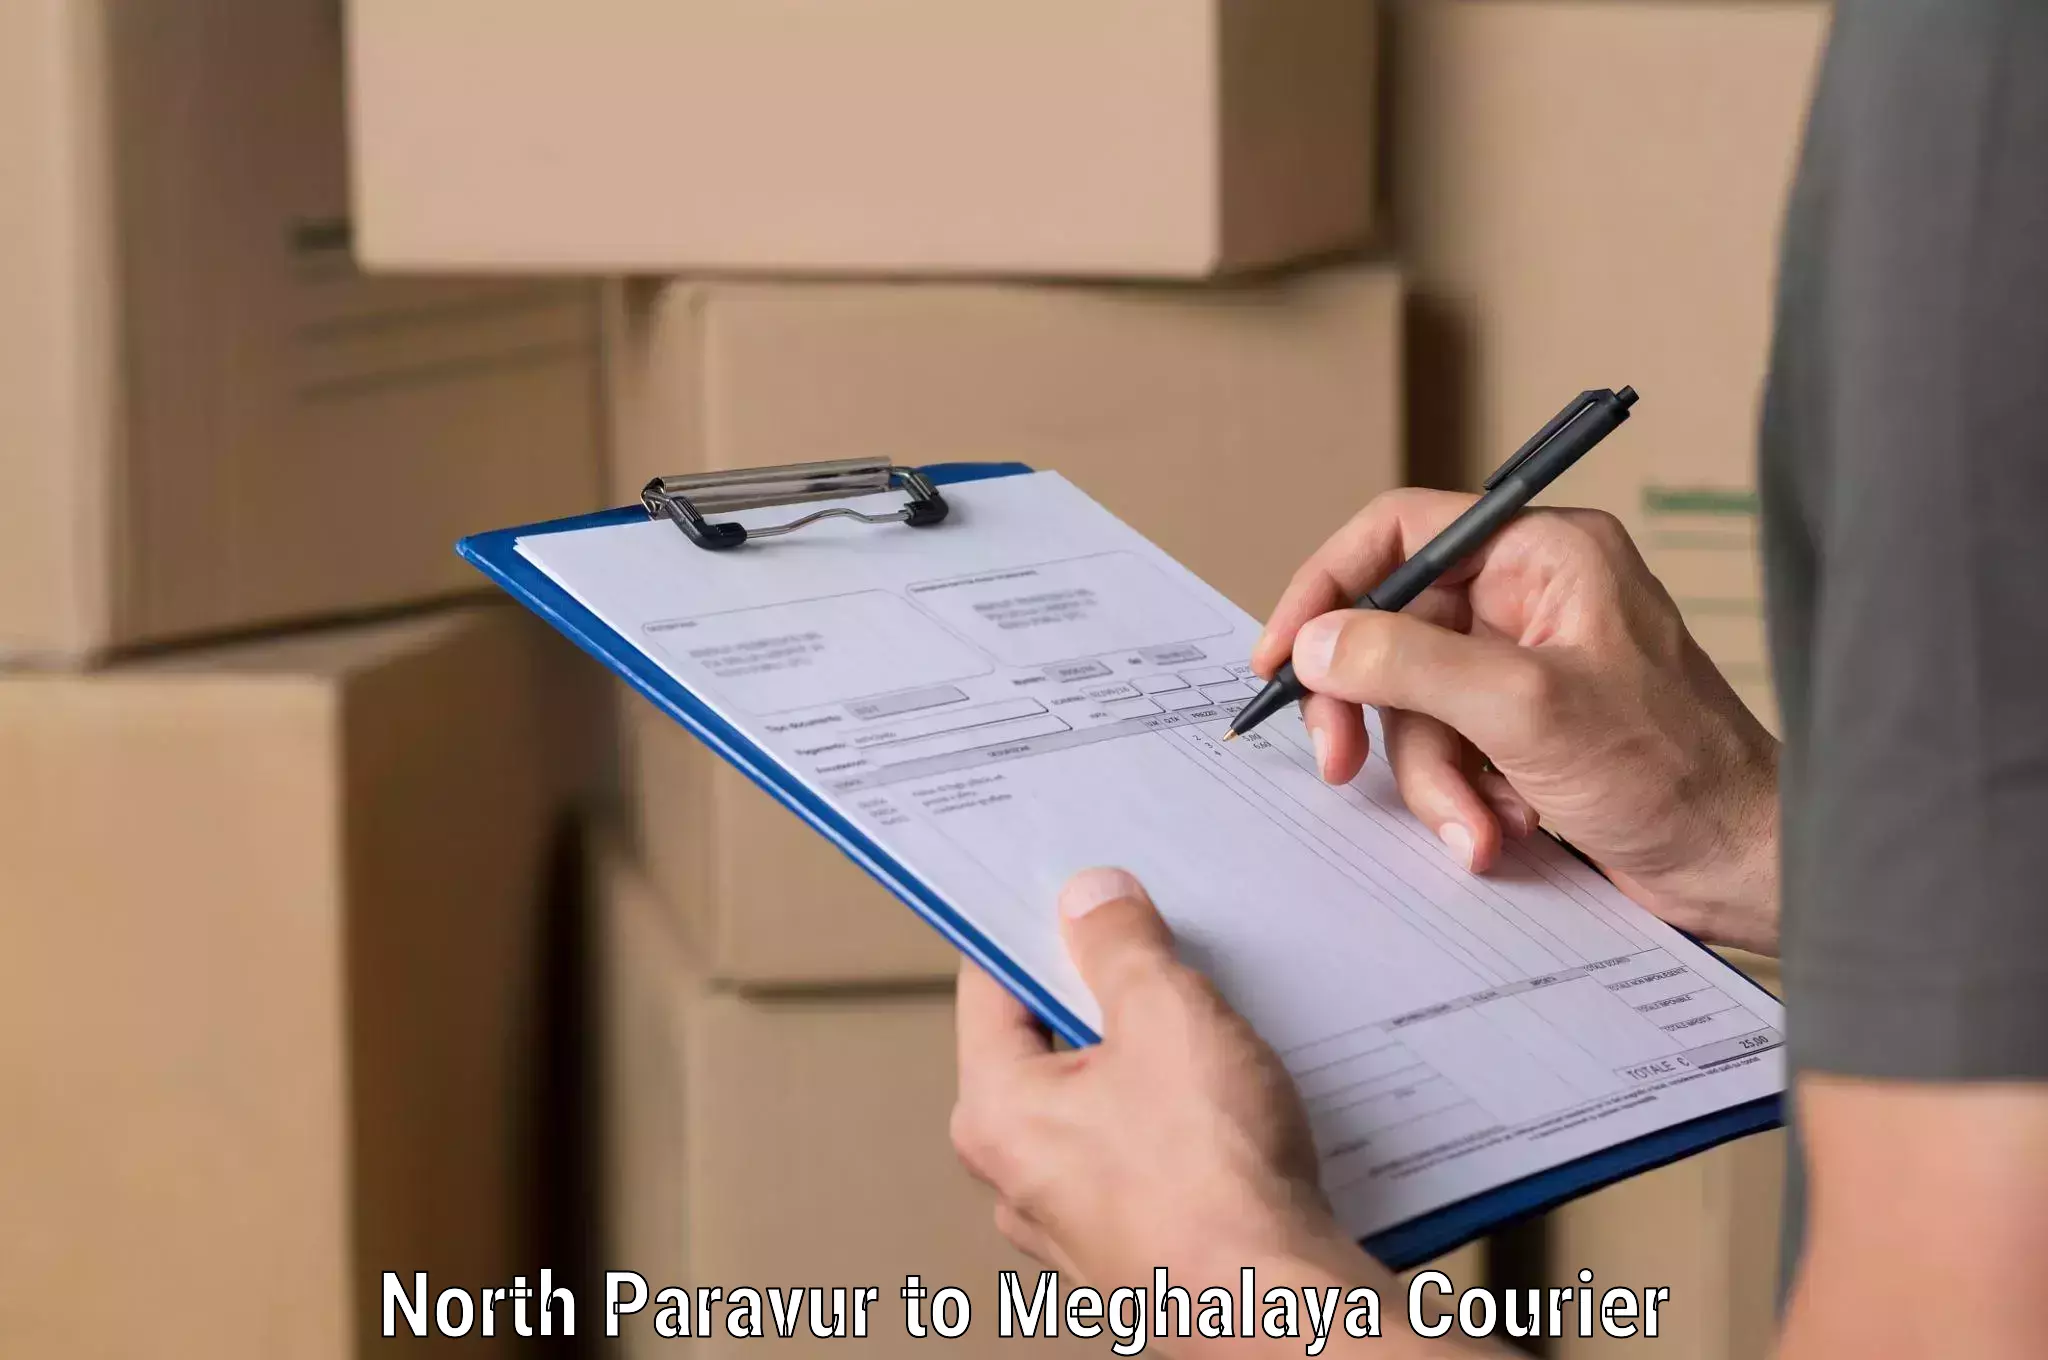 Affordable parcel service North Paravur to South Garo Hills